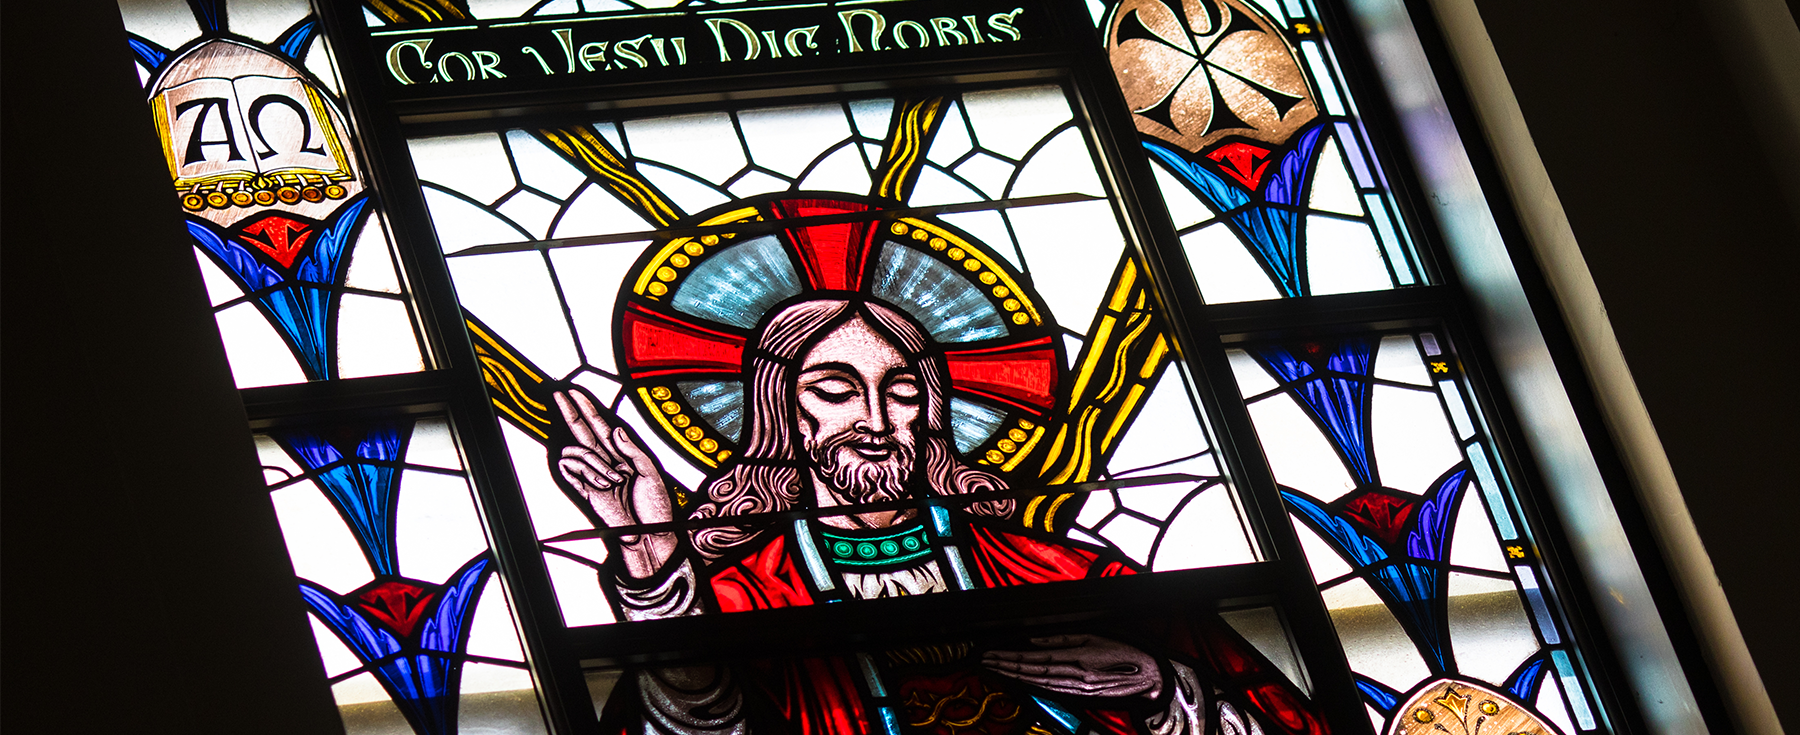 A stained glass portrait of Jesus Christ with 